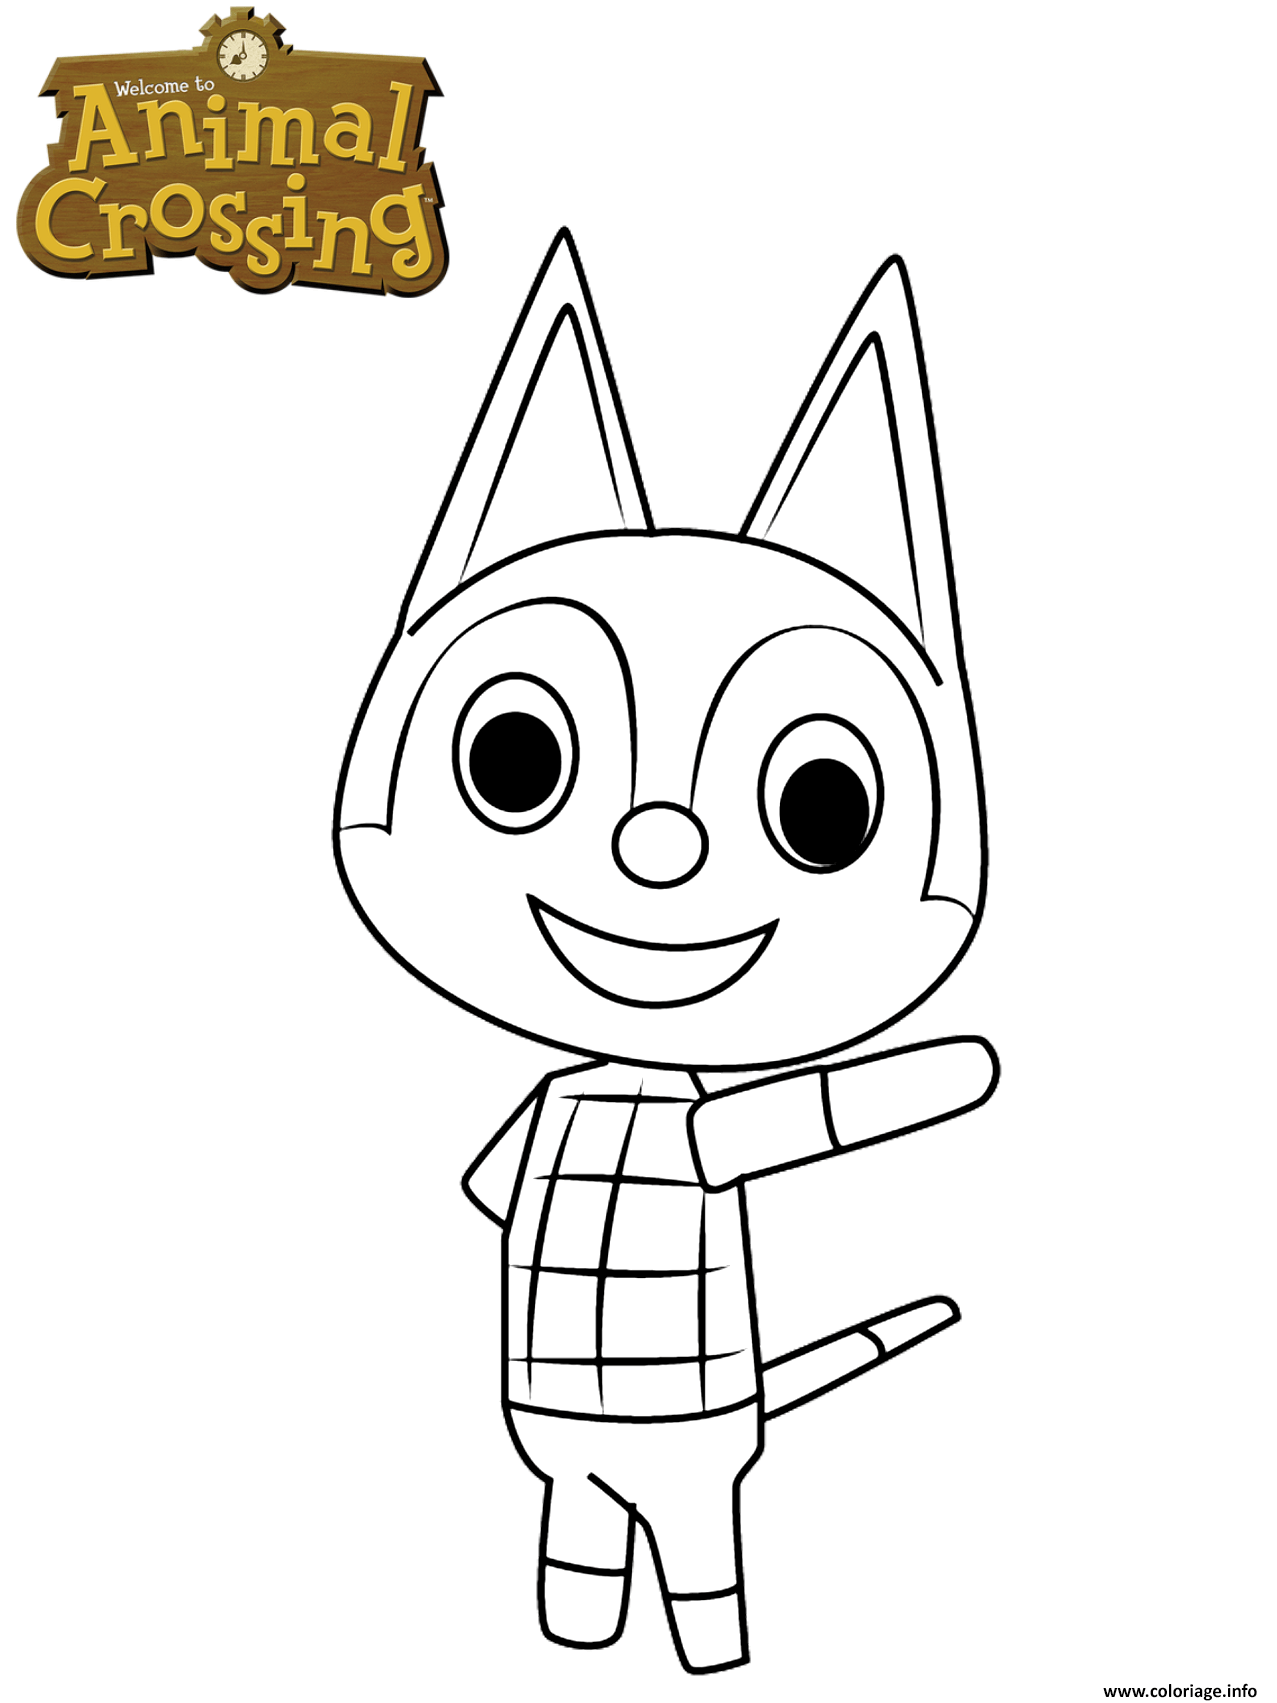 Coloriage animal crossing rudy the cat - JeColorie.com